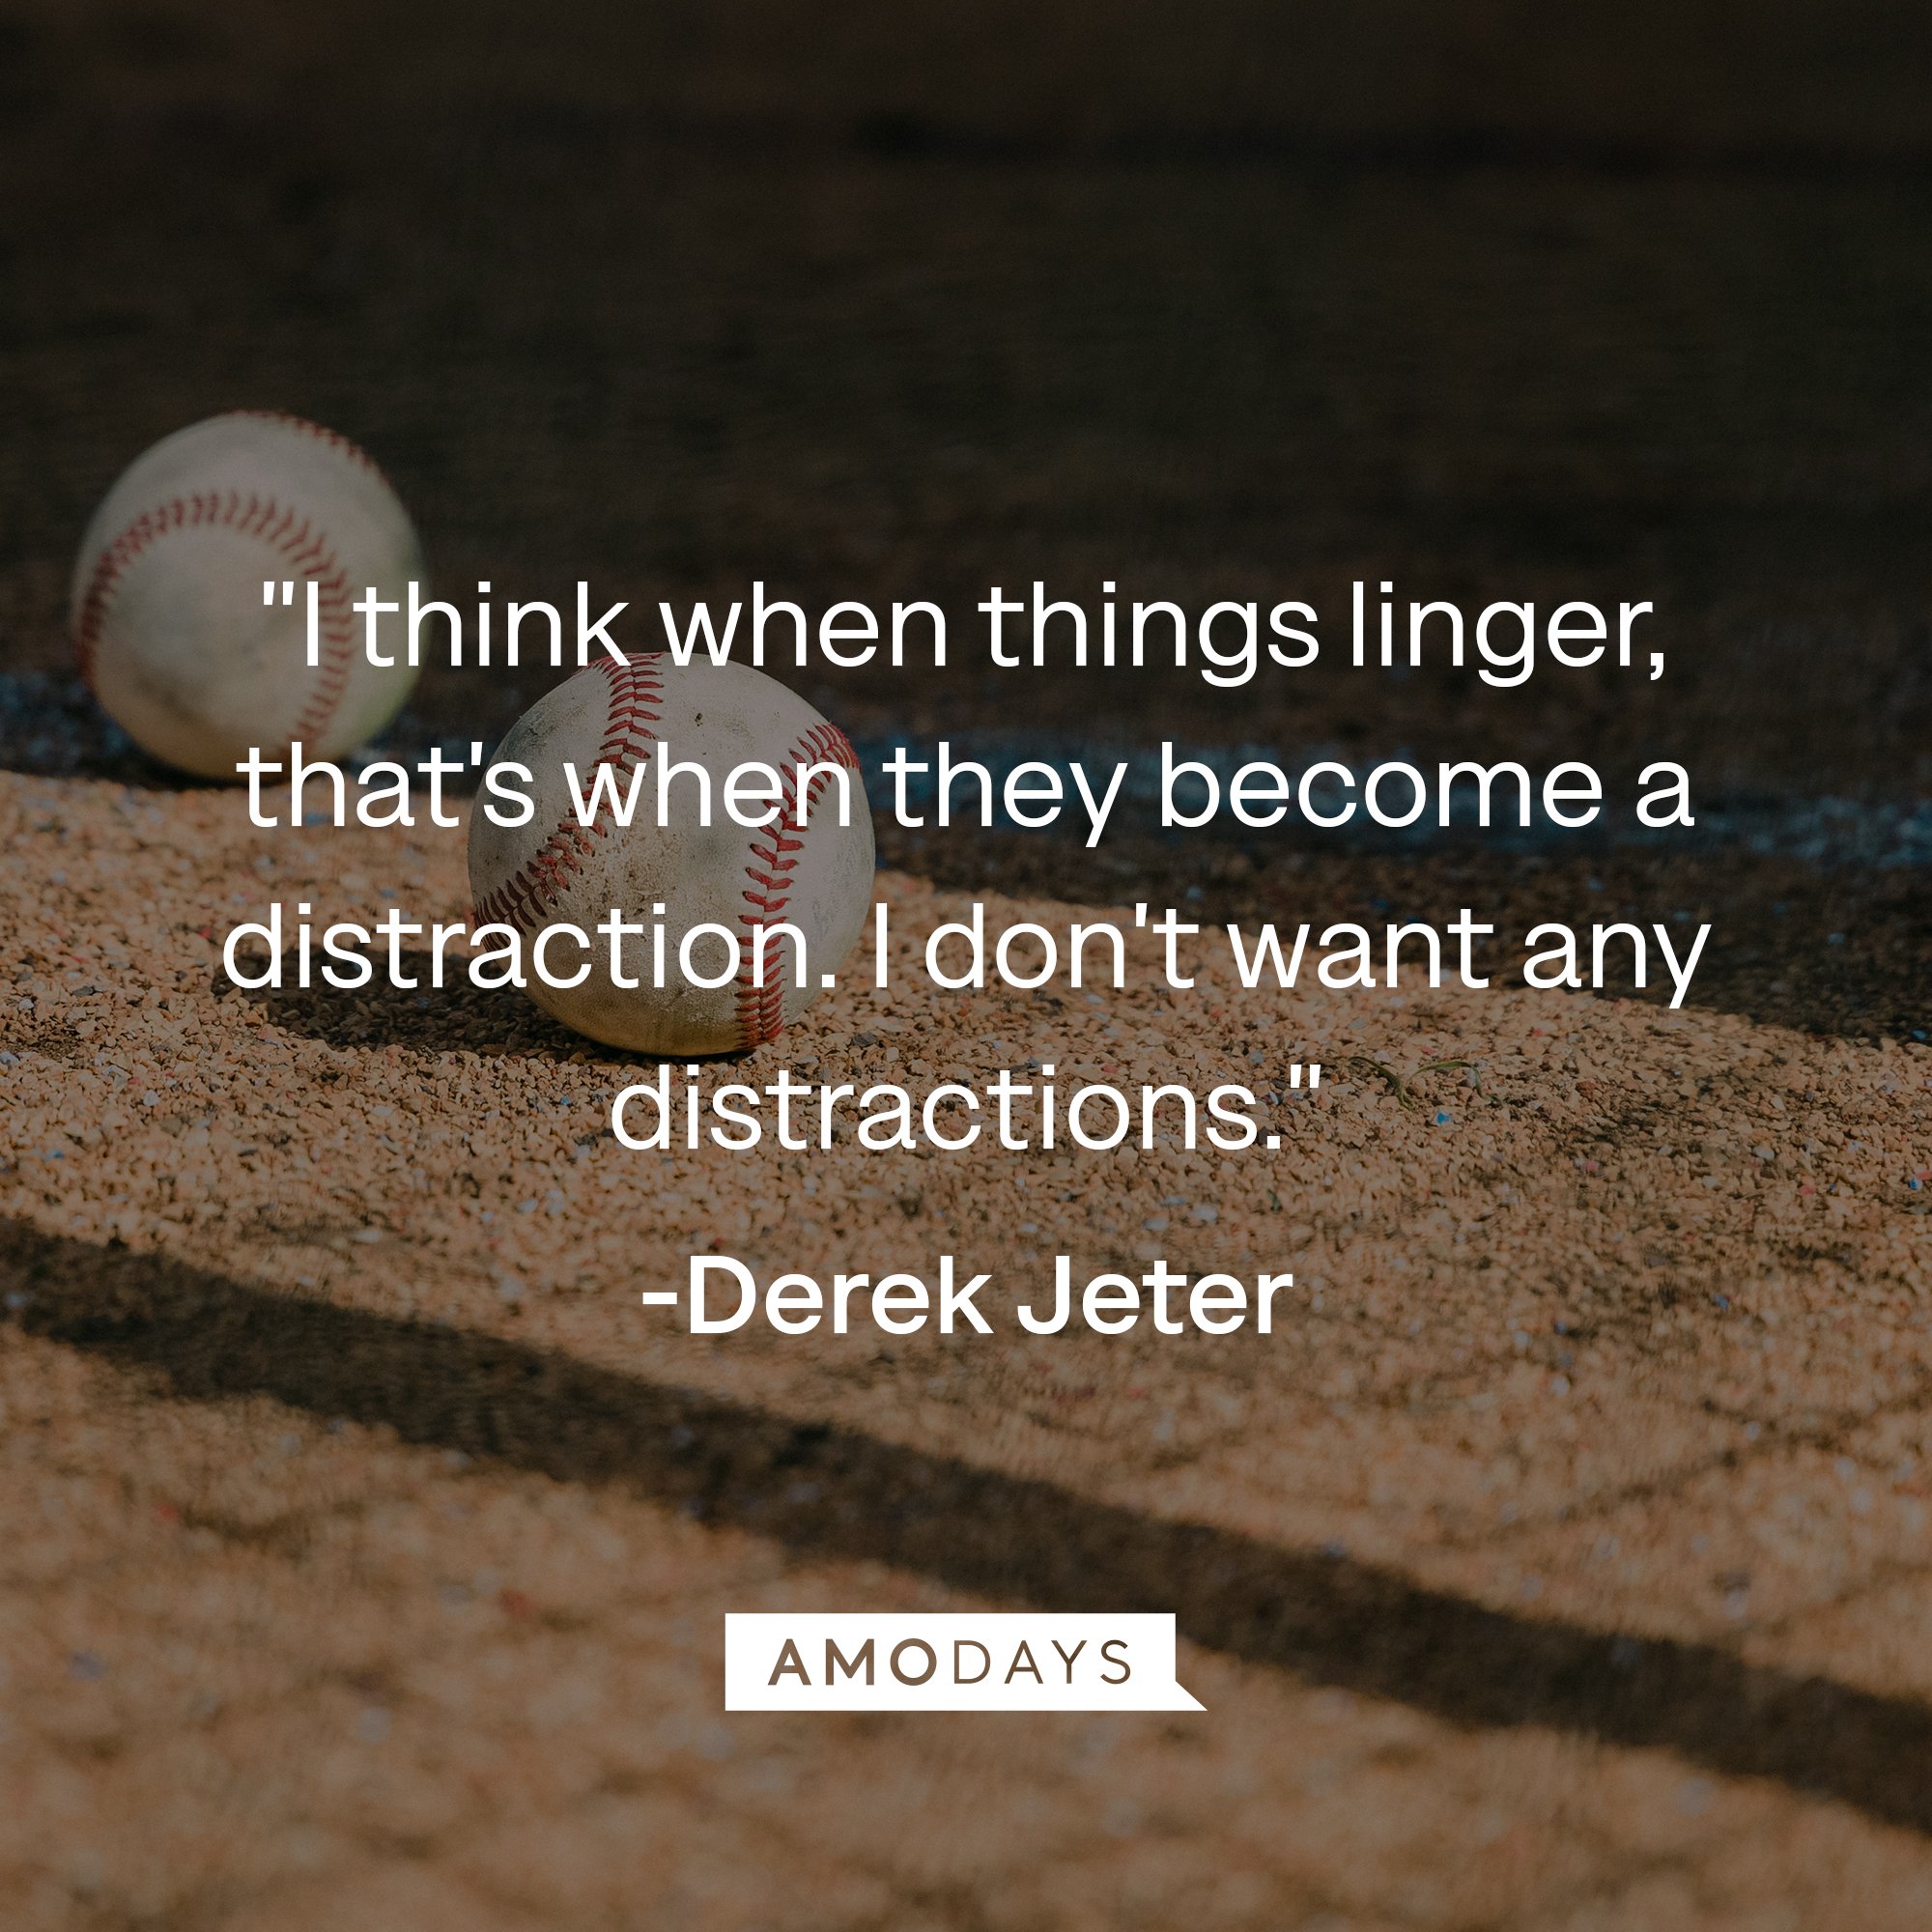 Derek Jeter's quote: "I think when things linger, that's when they become a distraction. I don't want any distractions." | Image: AmoDays